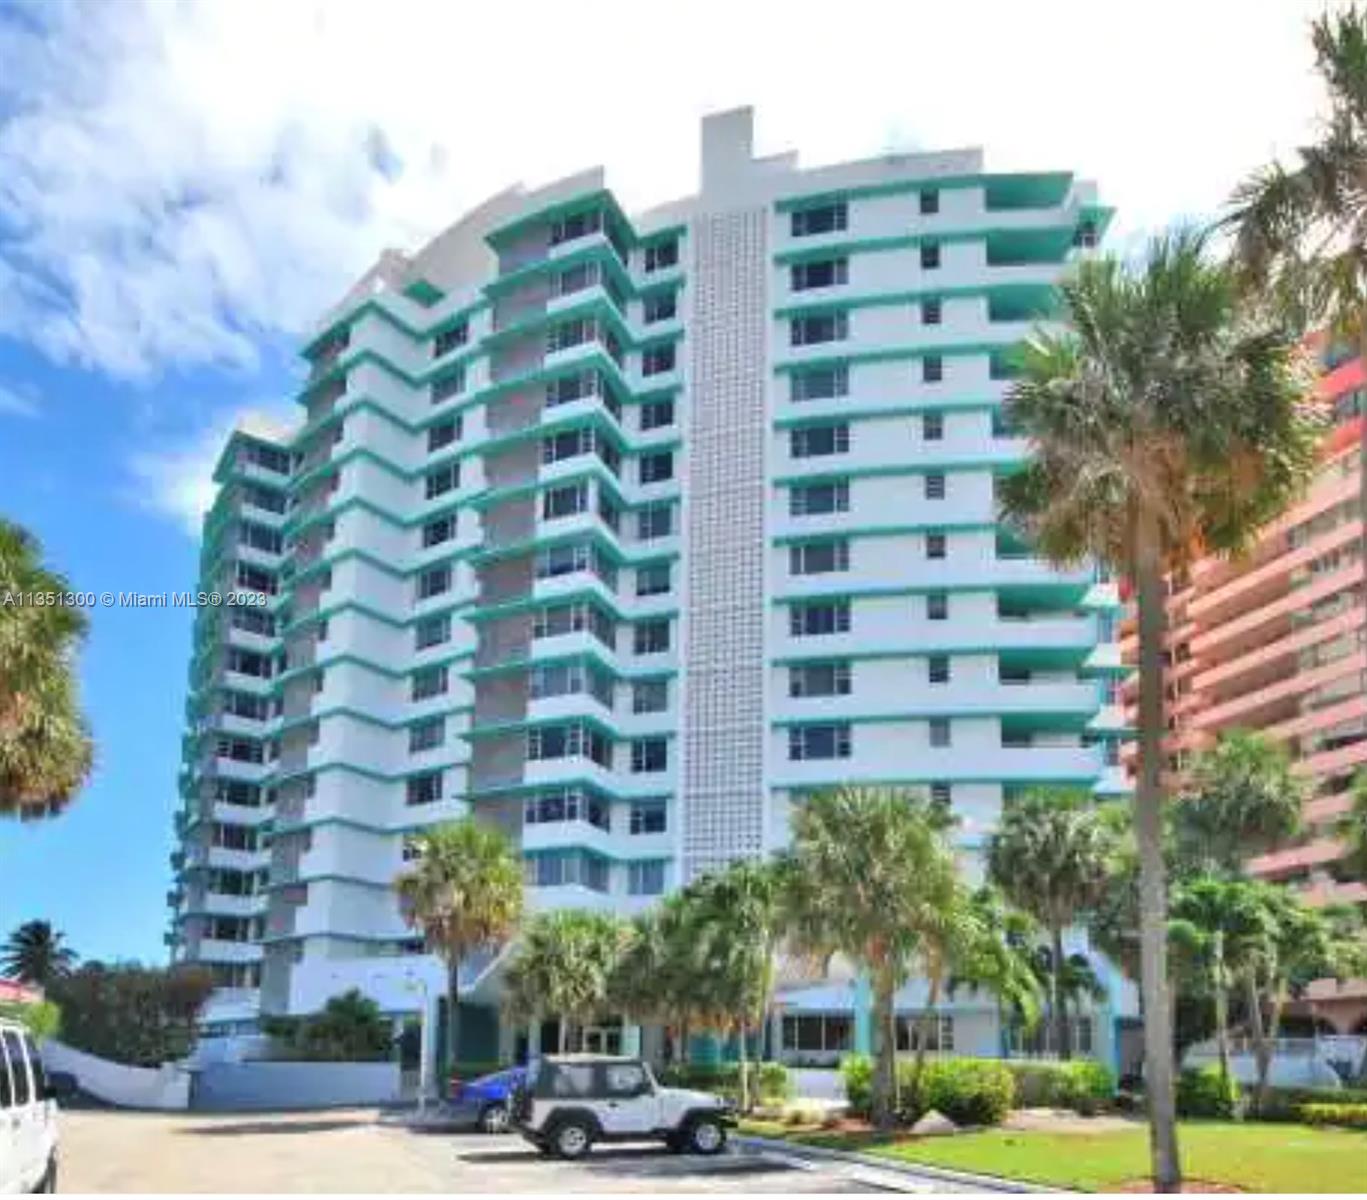 5255  Collins Ave #11B For Sale A11351300, FL